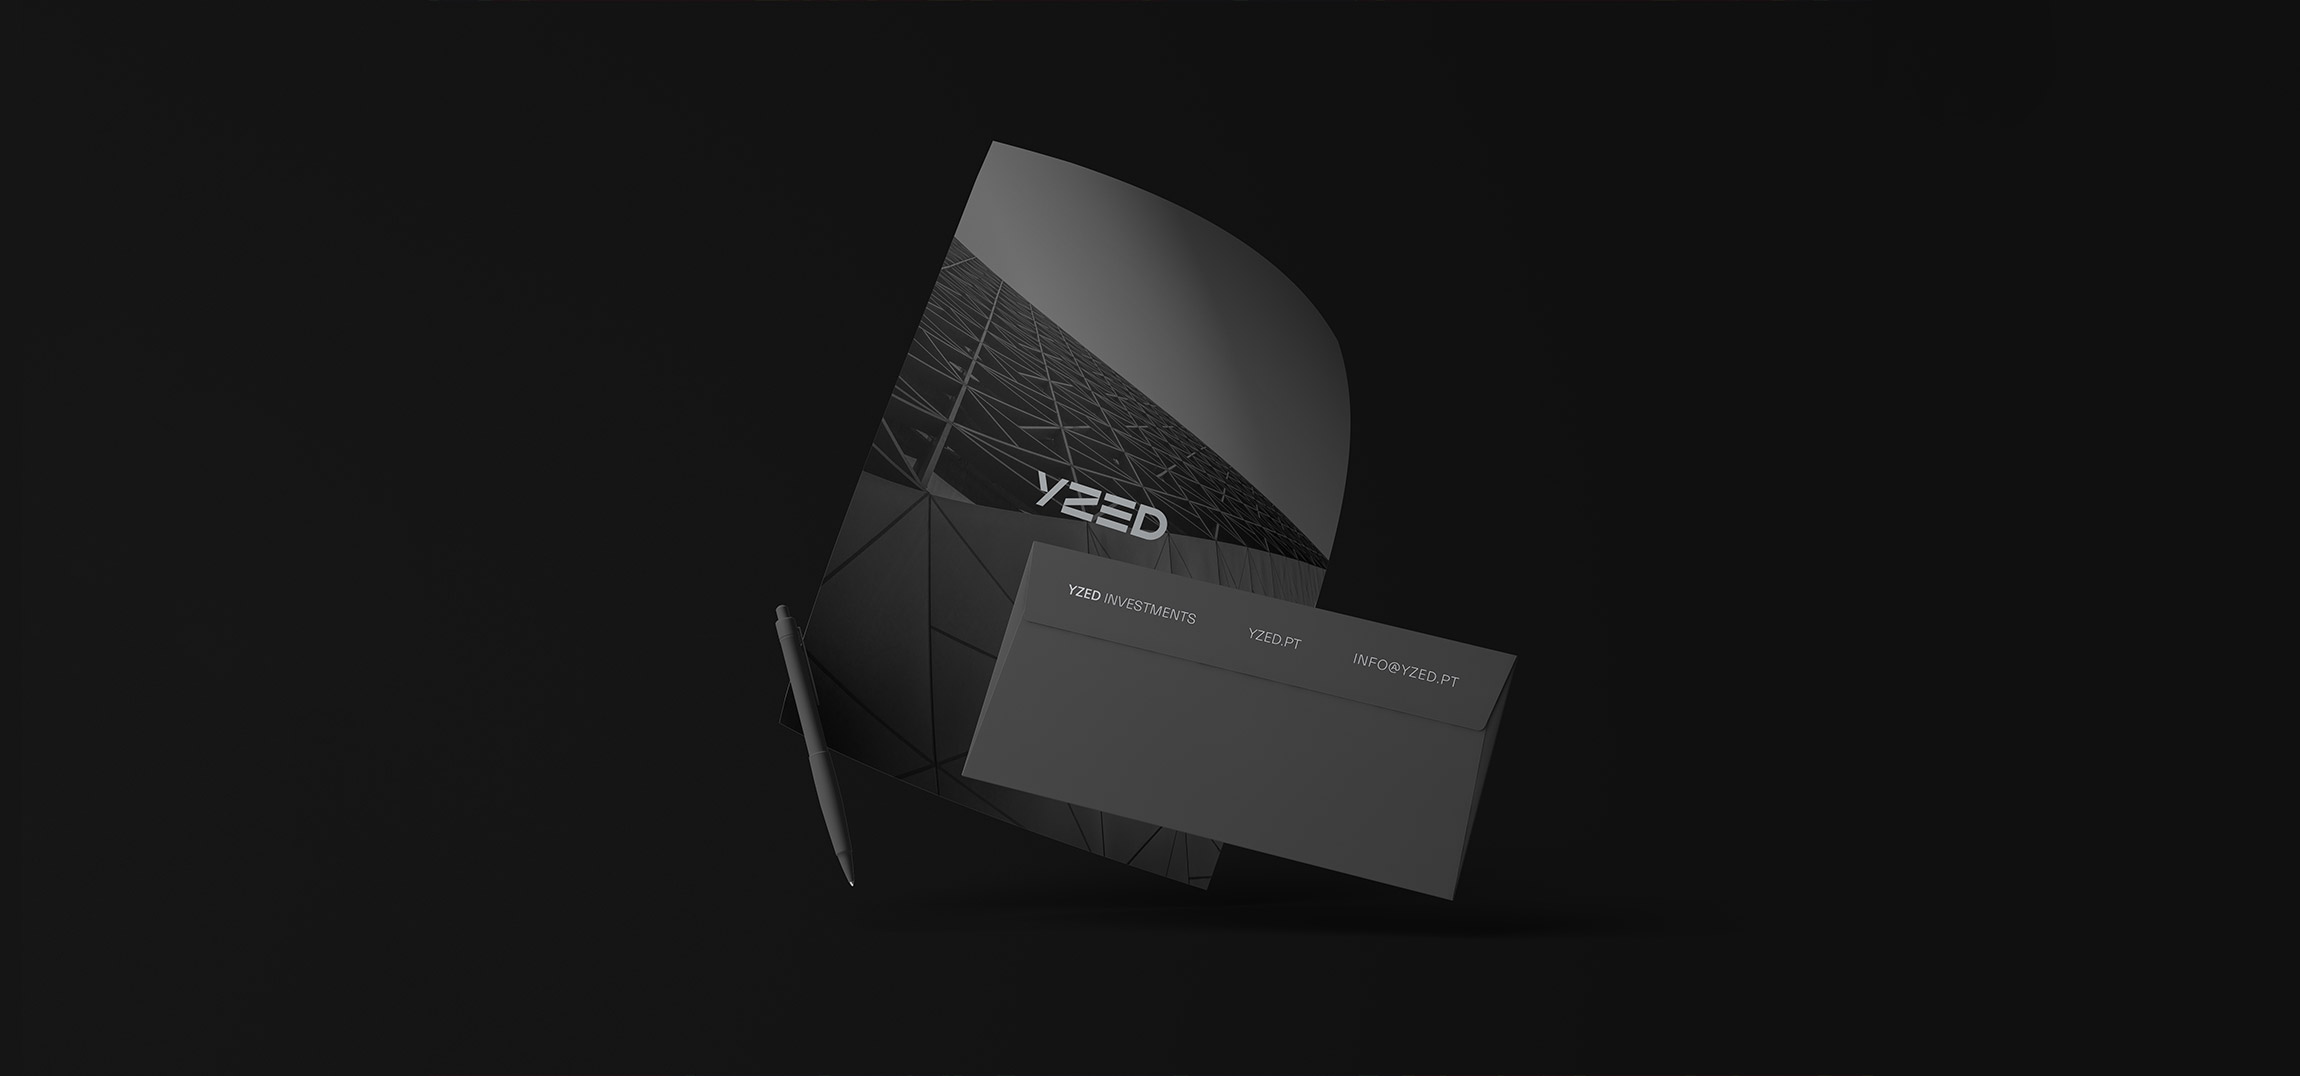 Yzed Investments